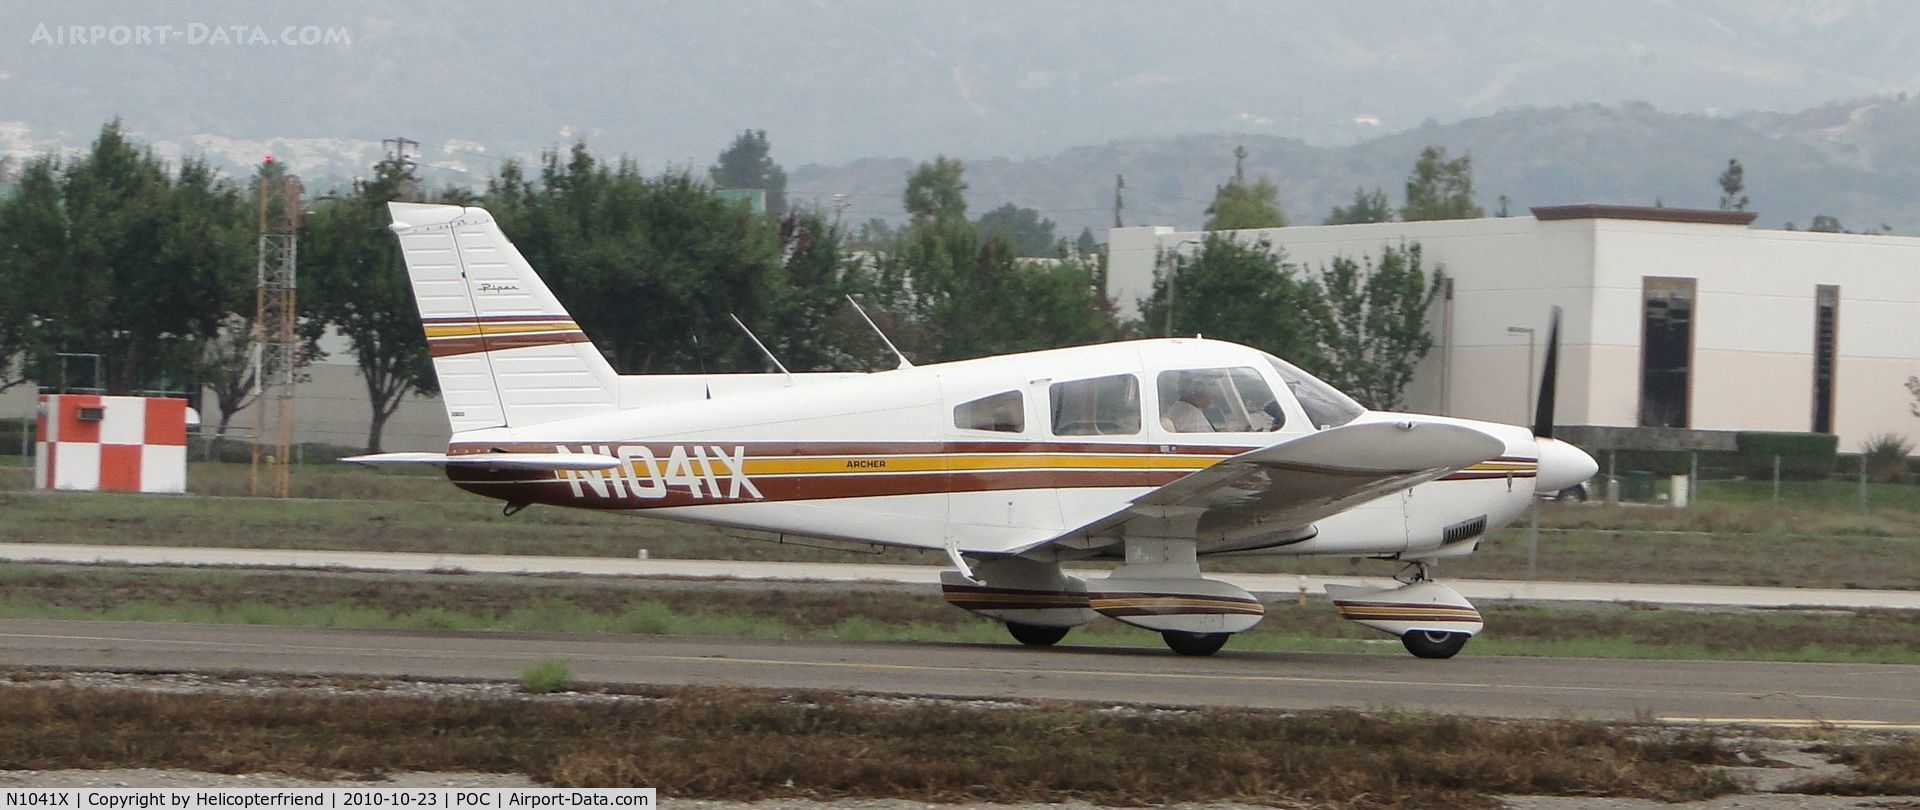 N1041X, 1975 Piper PA-28-180 C/N 28-7505199, Fast taxxing to runway 26L on taxiway Sierra